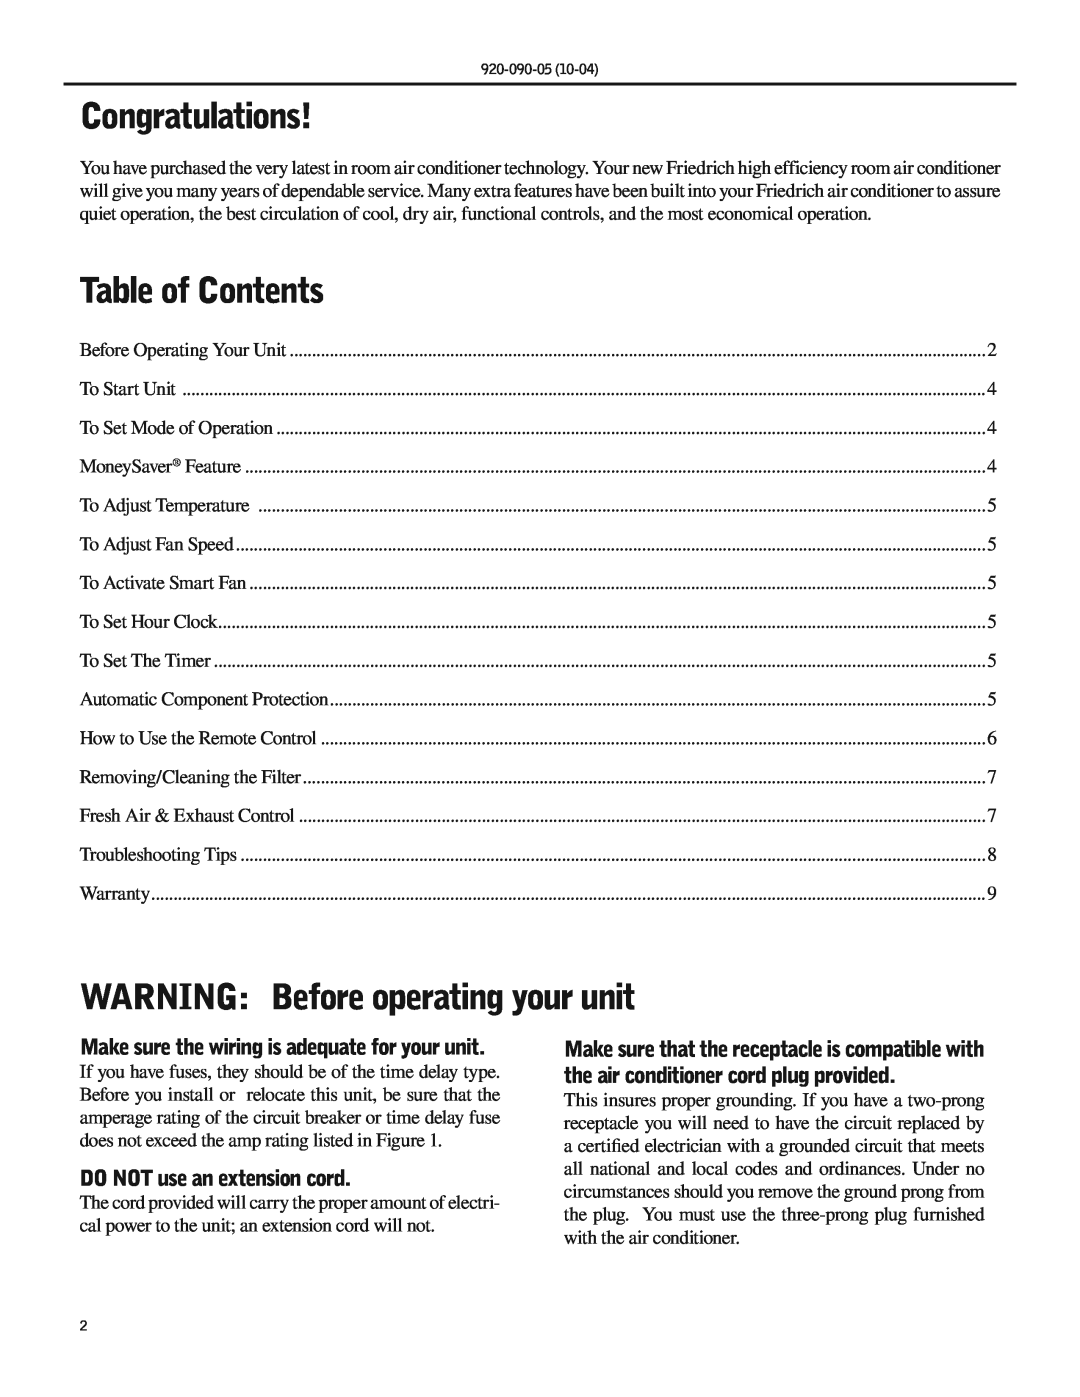 Friedrich SS09 manual Congratulations, Table of Contents, WARNING Before operating your unit, DO NOT use an extension cord 